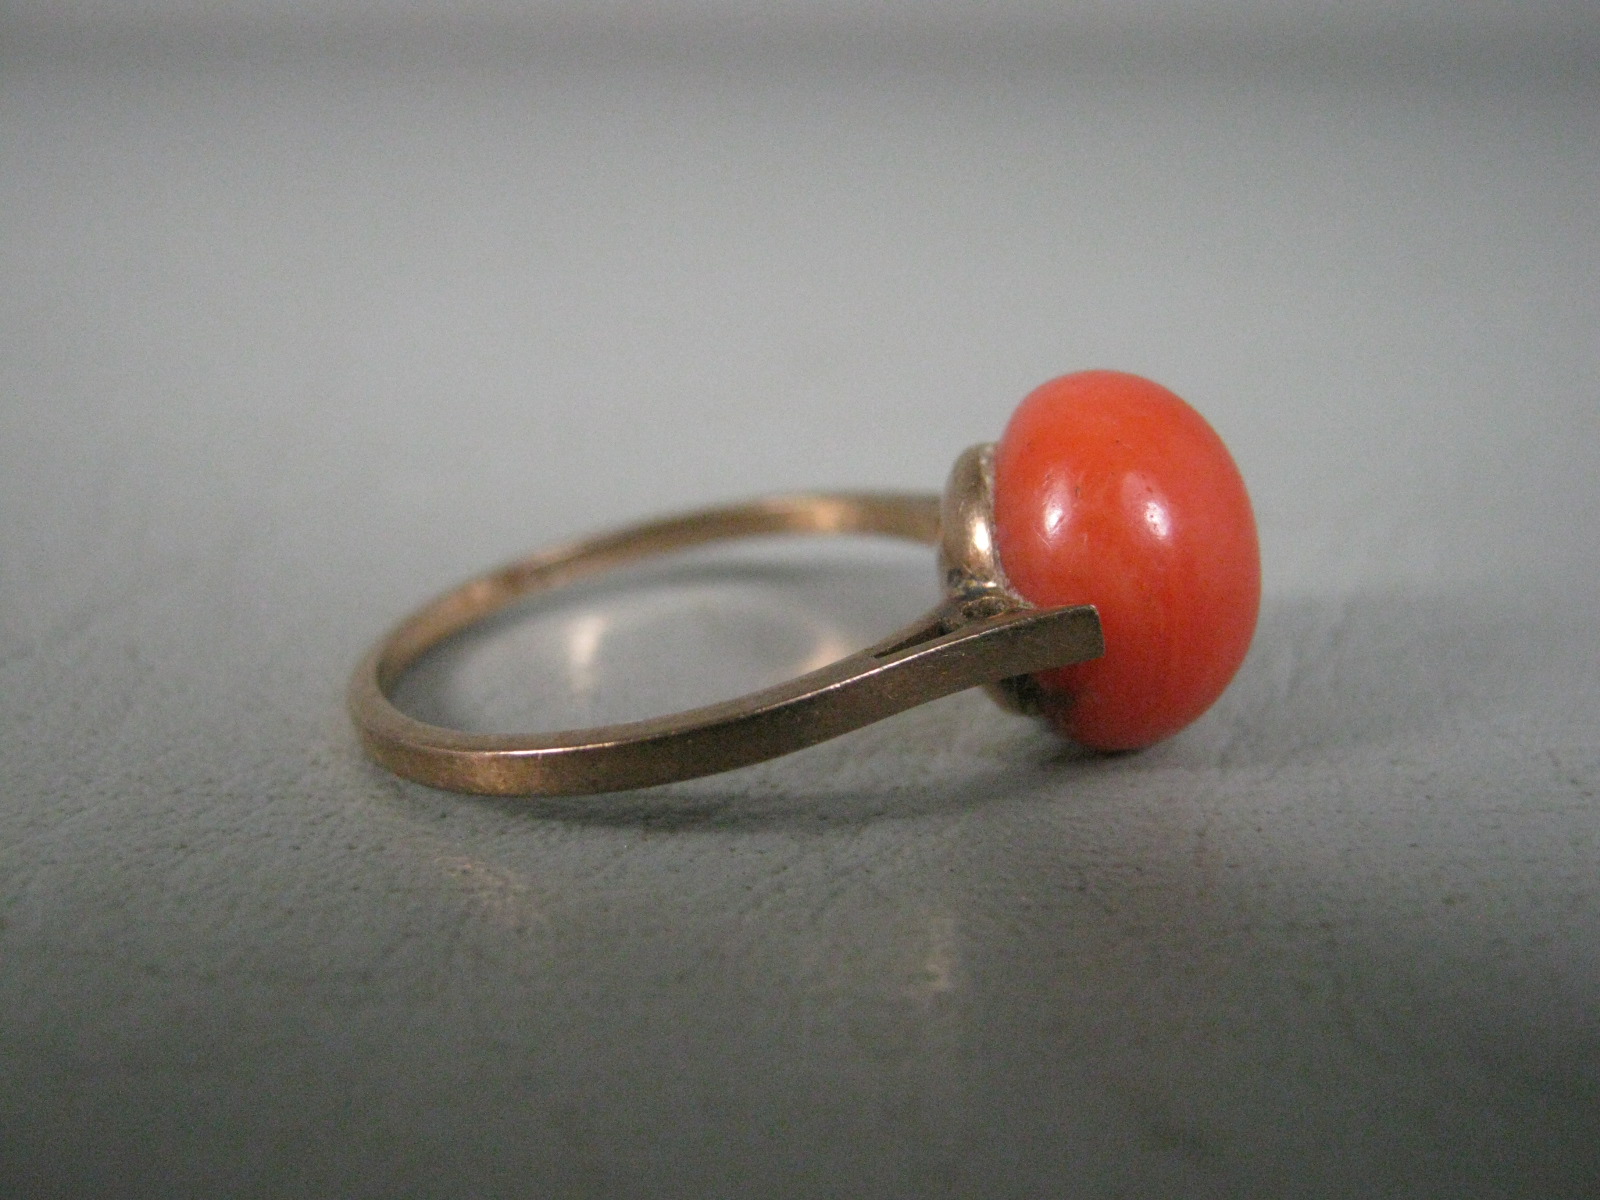 Vtg Antique 585 14K 14 Karat Yellow Gold Red Coral Ring Size 7 Estate Jewelry NR 4